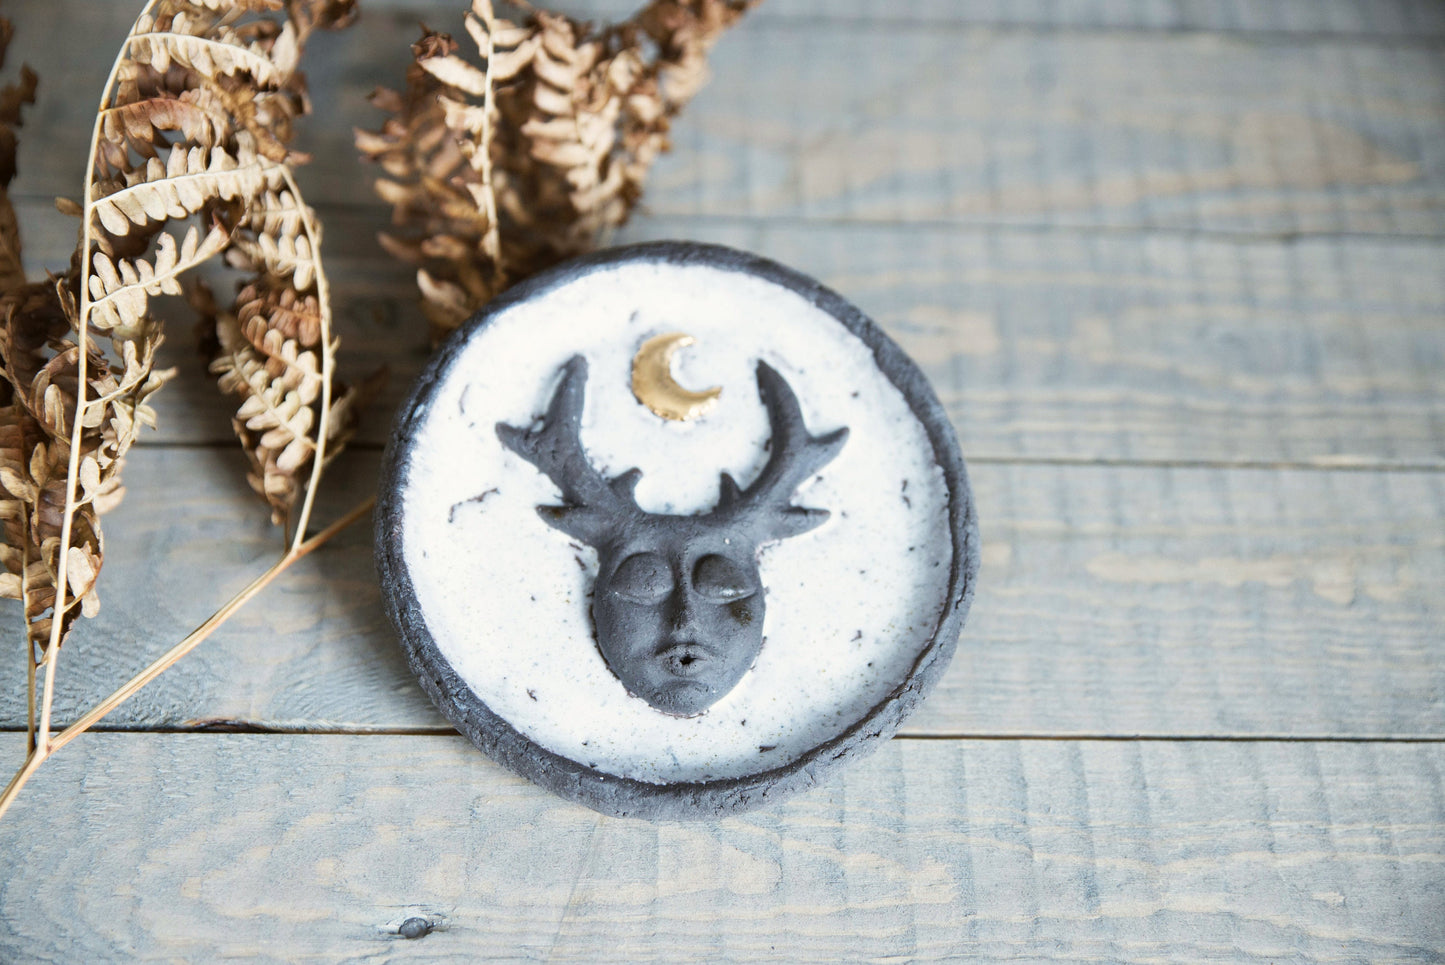 Incense holder with young moon and mystic creature - Palo santo incense burner - Ceramic candle plate